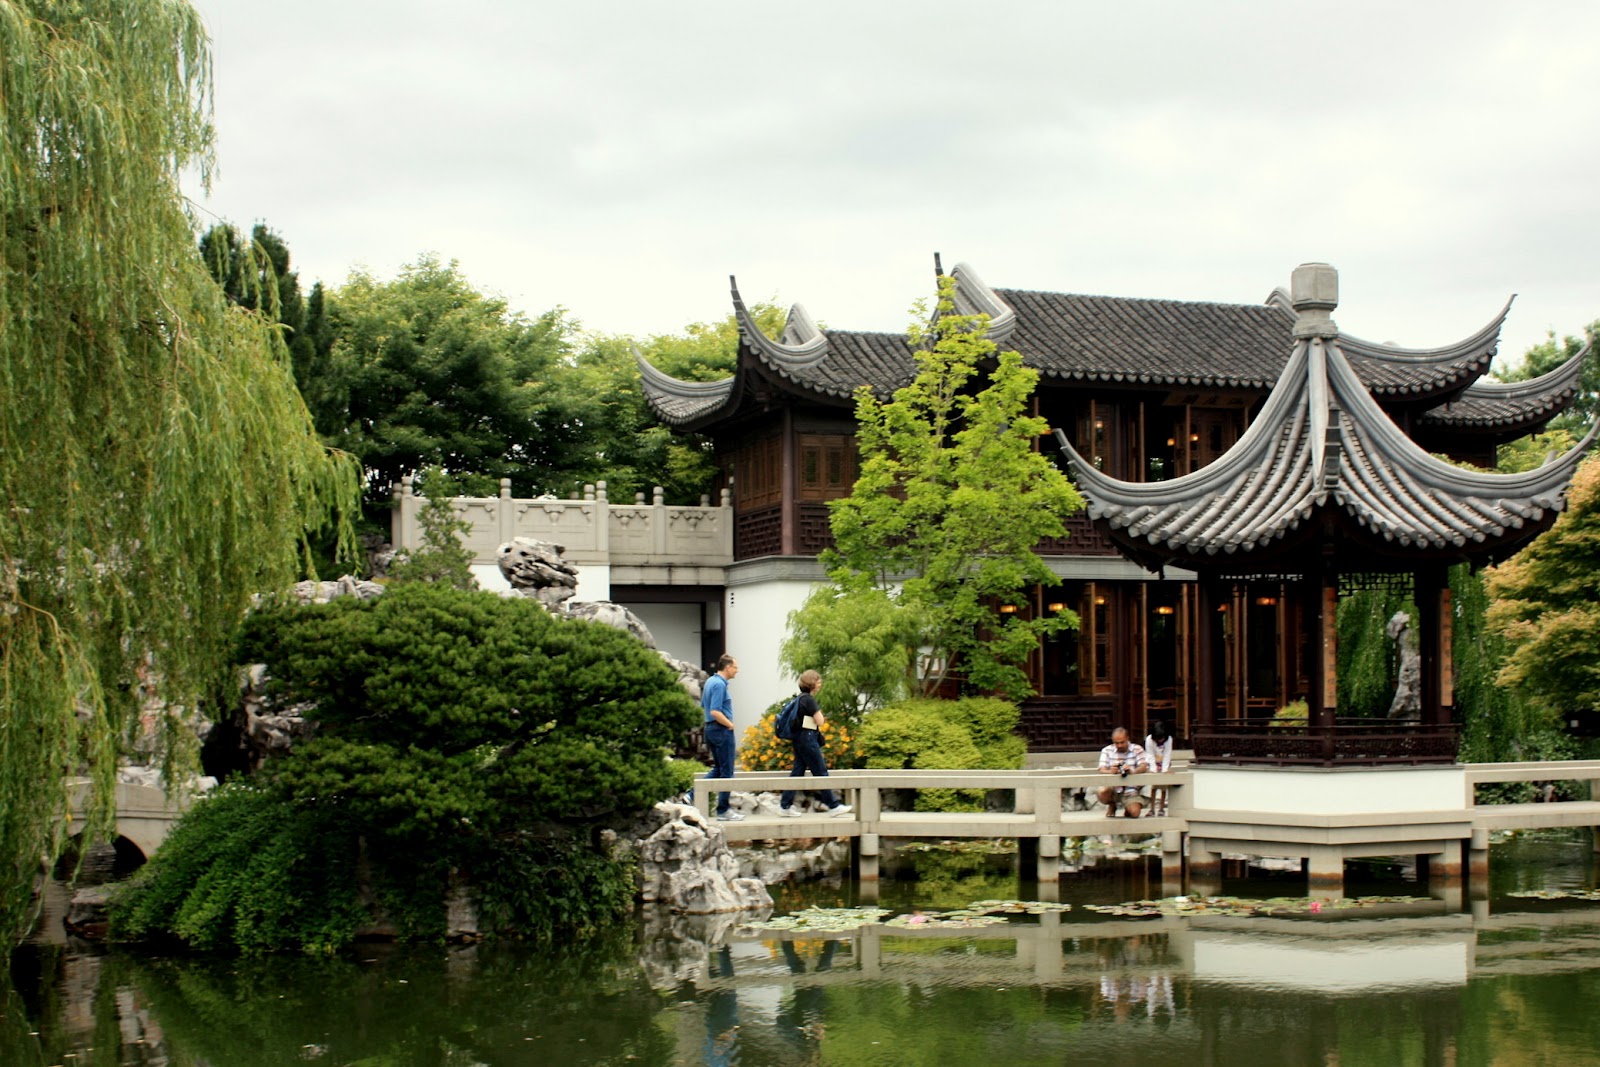 Rainy day thoughts: Lan Su Chinese Garden